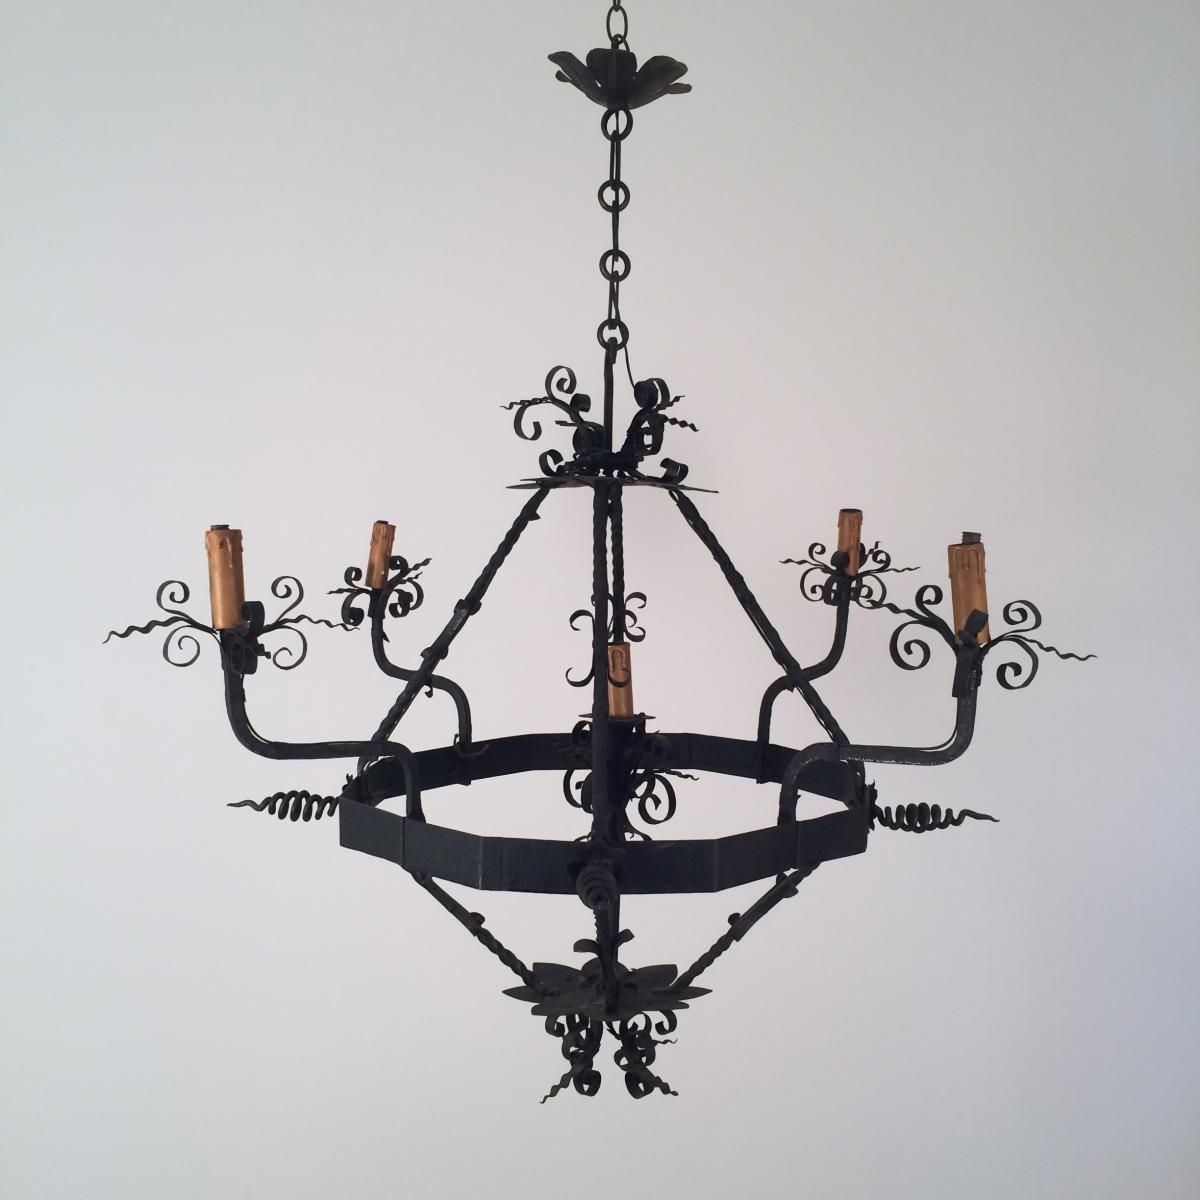 Vintage Wrought Iron Chandelier 1960s For Sale At Pamono Pertaining To Vintage Wrought Iron Chandelier (View 5 of 12)